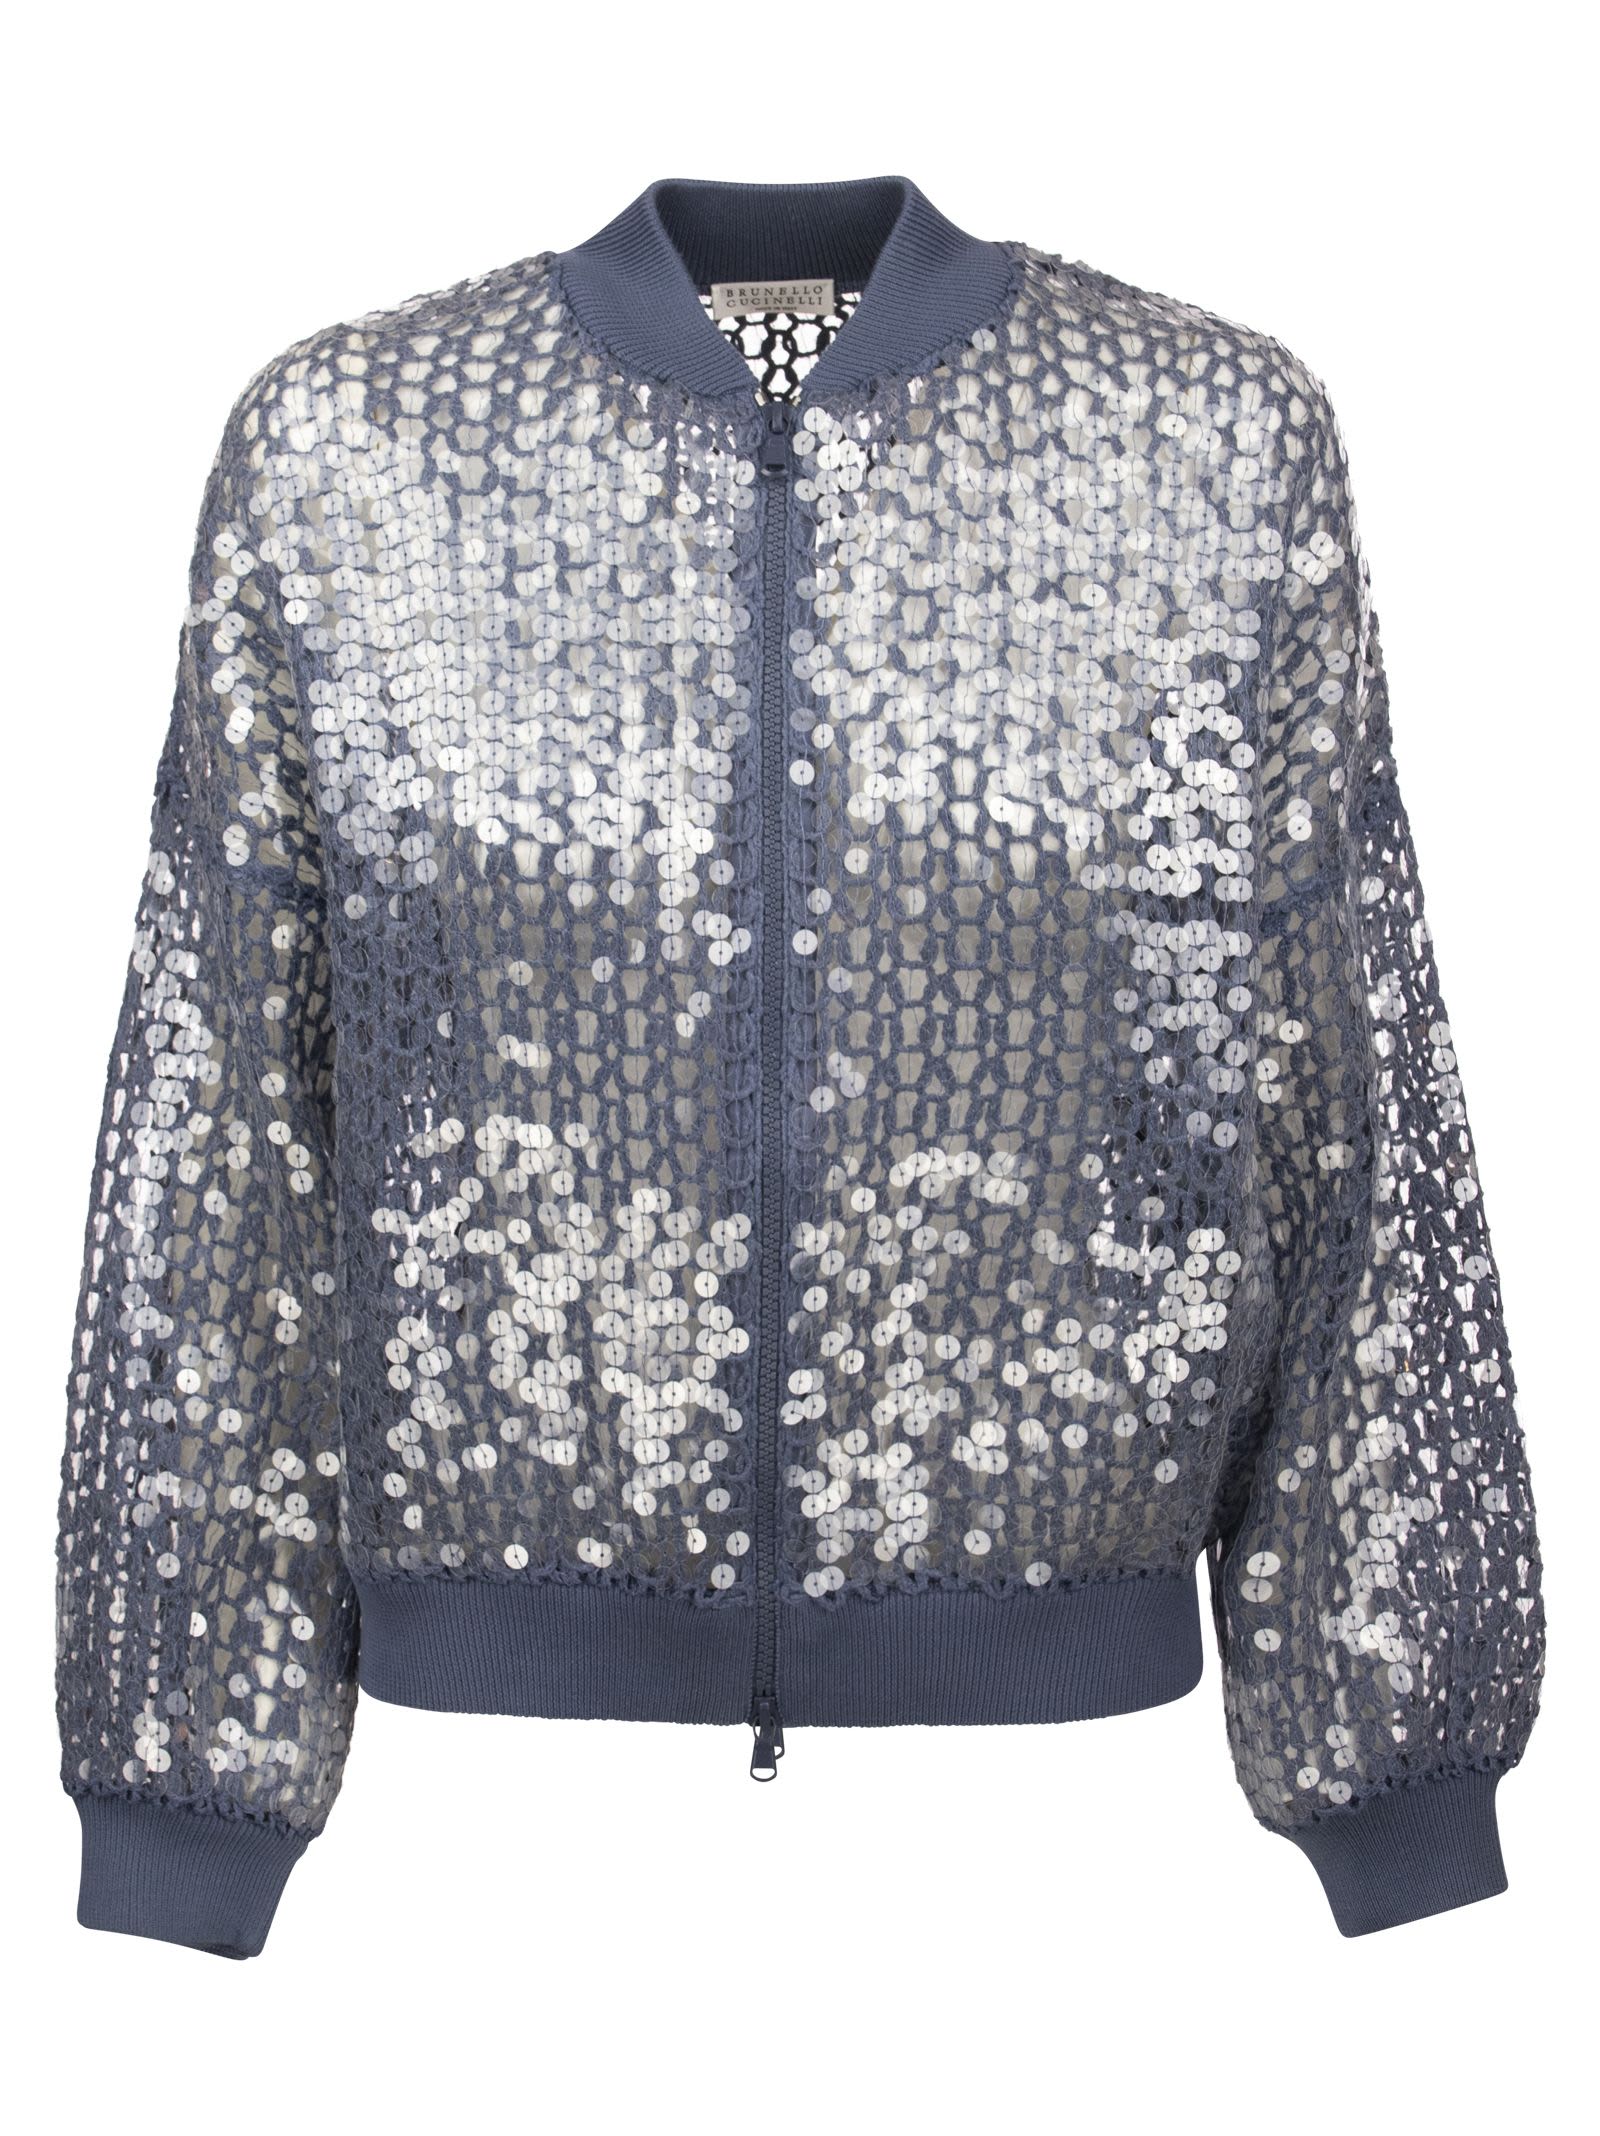 BRUNELLO CUCINELLI DAZZLING EMBROIDERY JUTE AND COTTON BOMBER JACKET